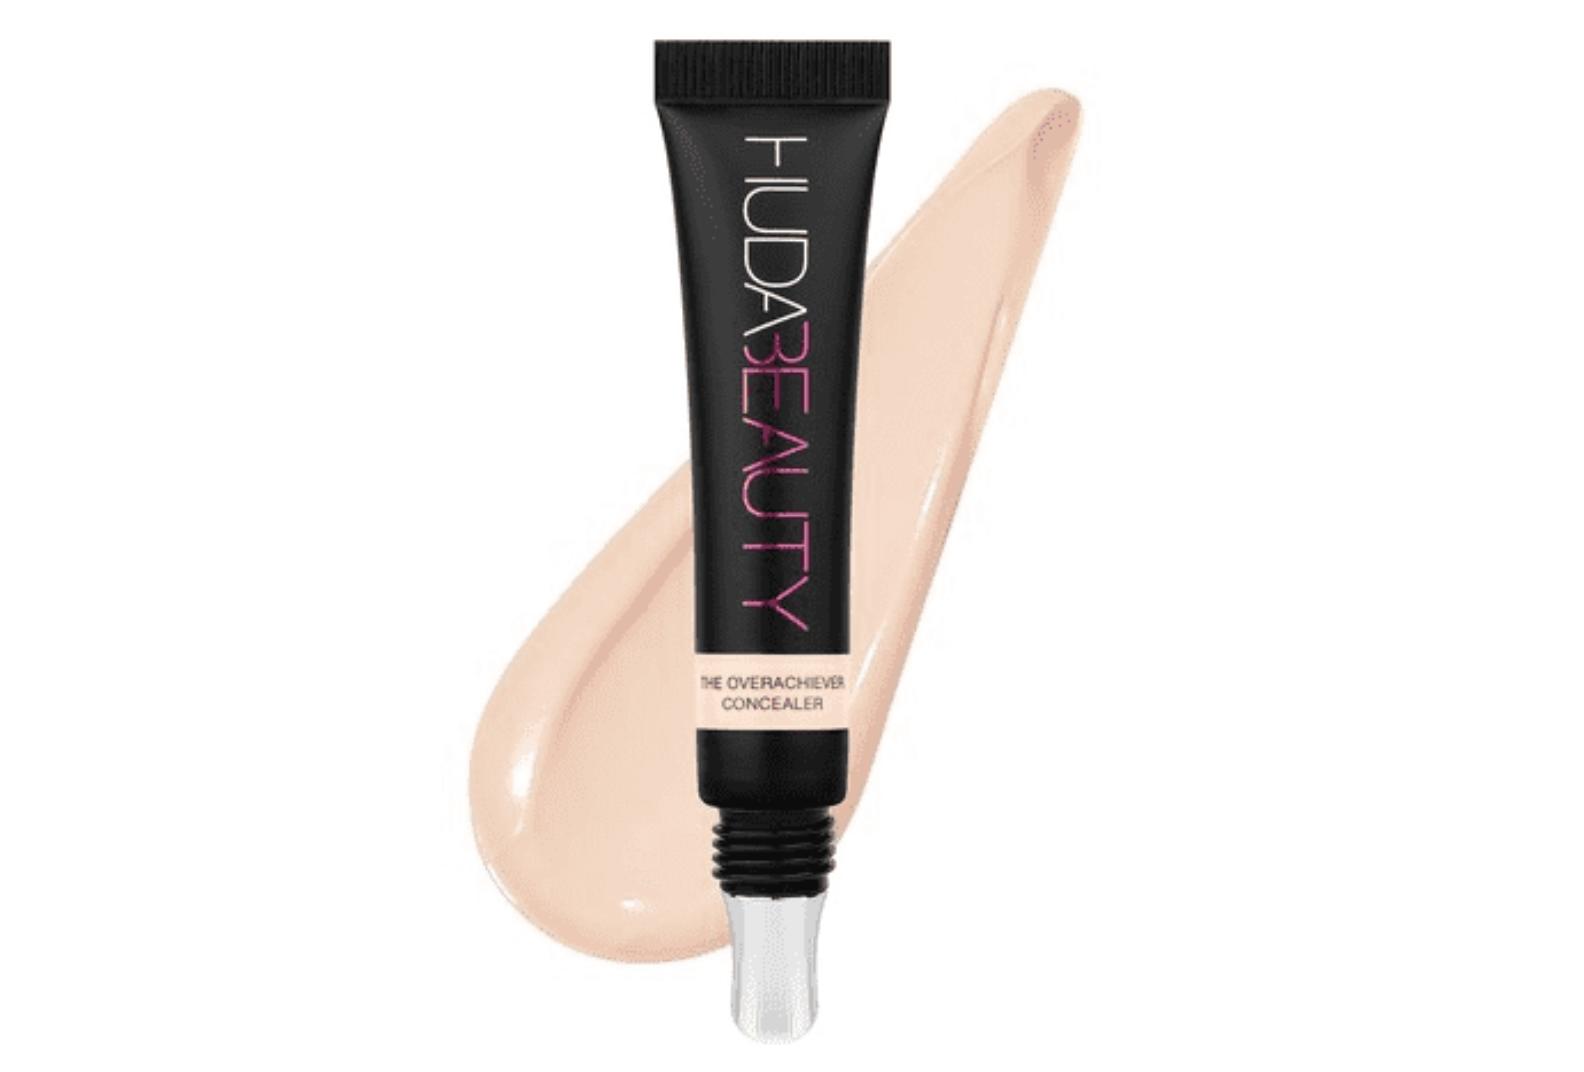 Huda Beauty Overachiever Concealer Marshmallow